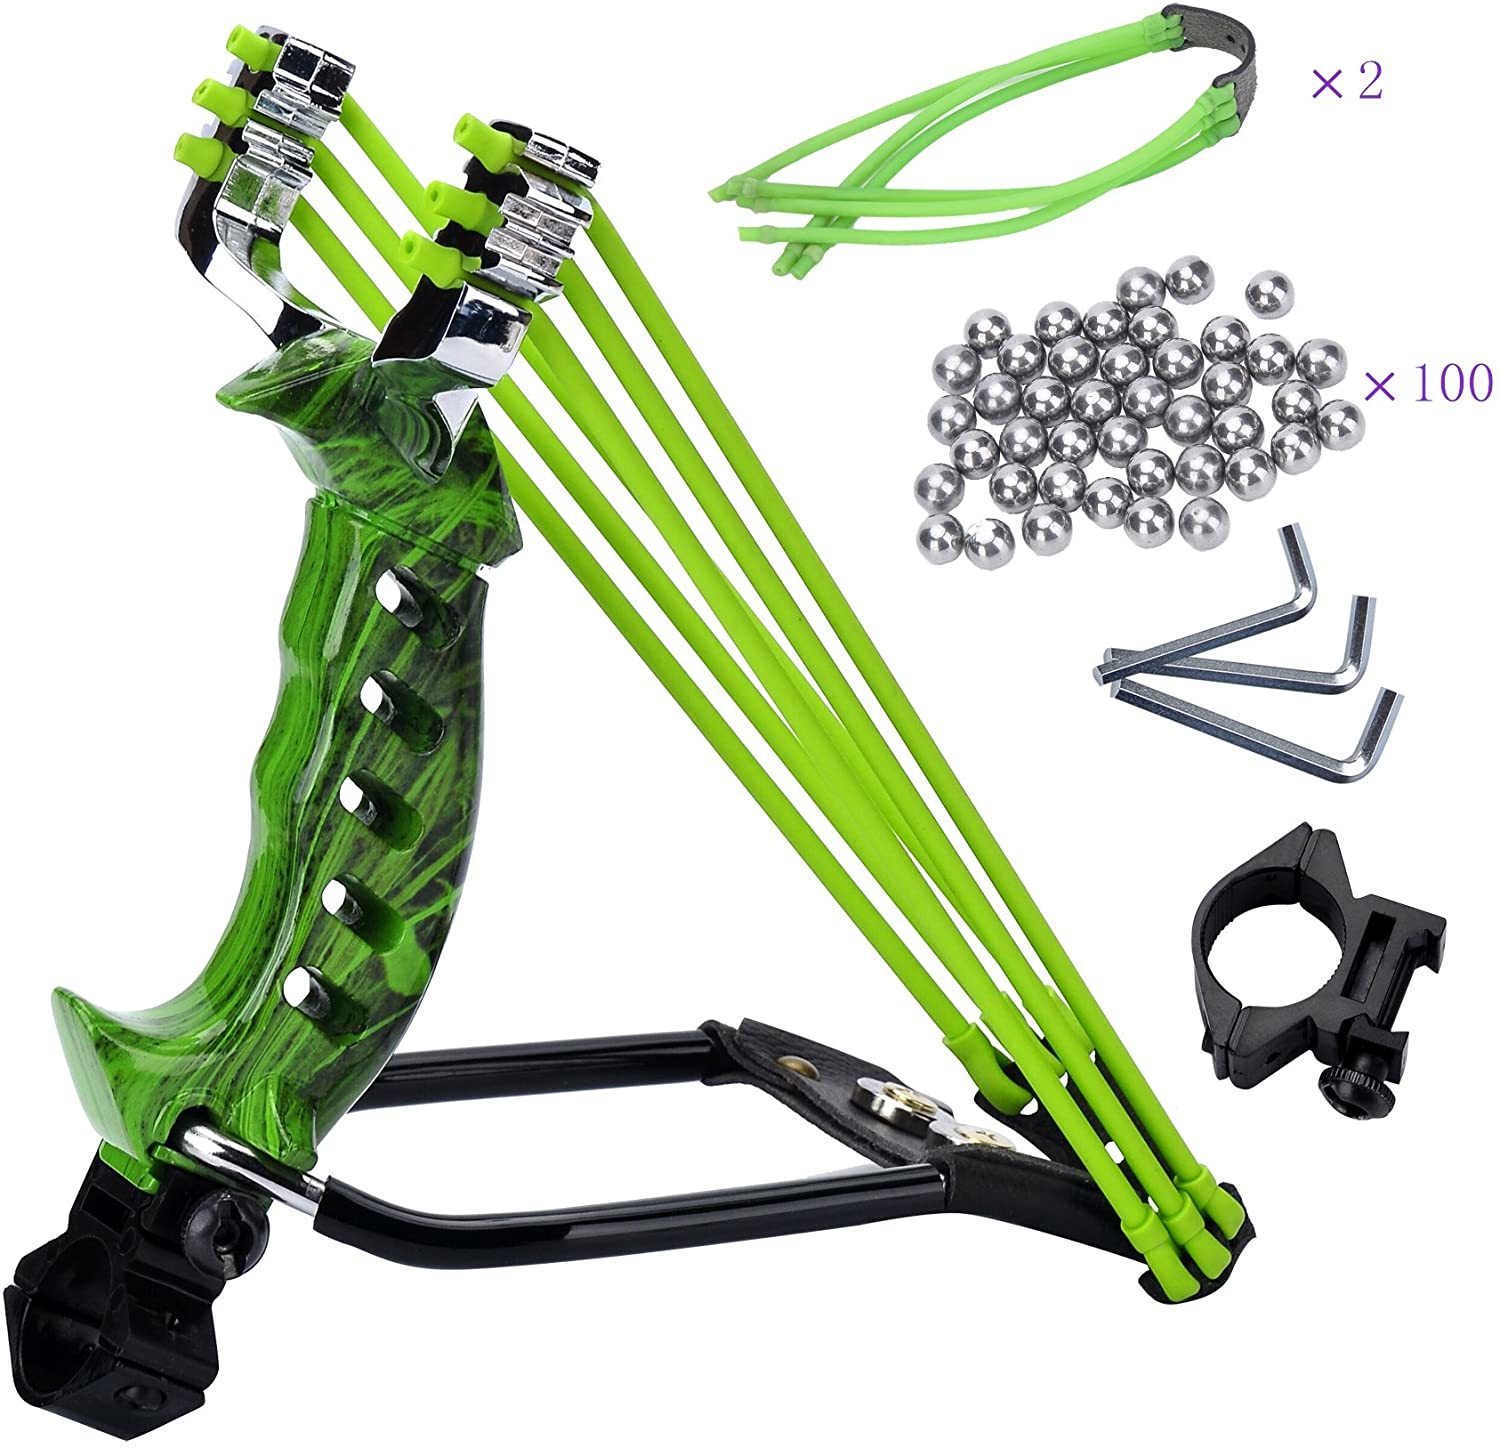 NOBONDO Strong Folding Wrist Rocket Slingshot - Heavy Duty Adjustable  Stainless Steel Wrist Brace Hunting Catapult with 2 Rubber Bands and 100  Ammo Balls